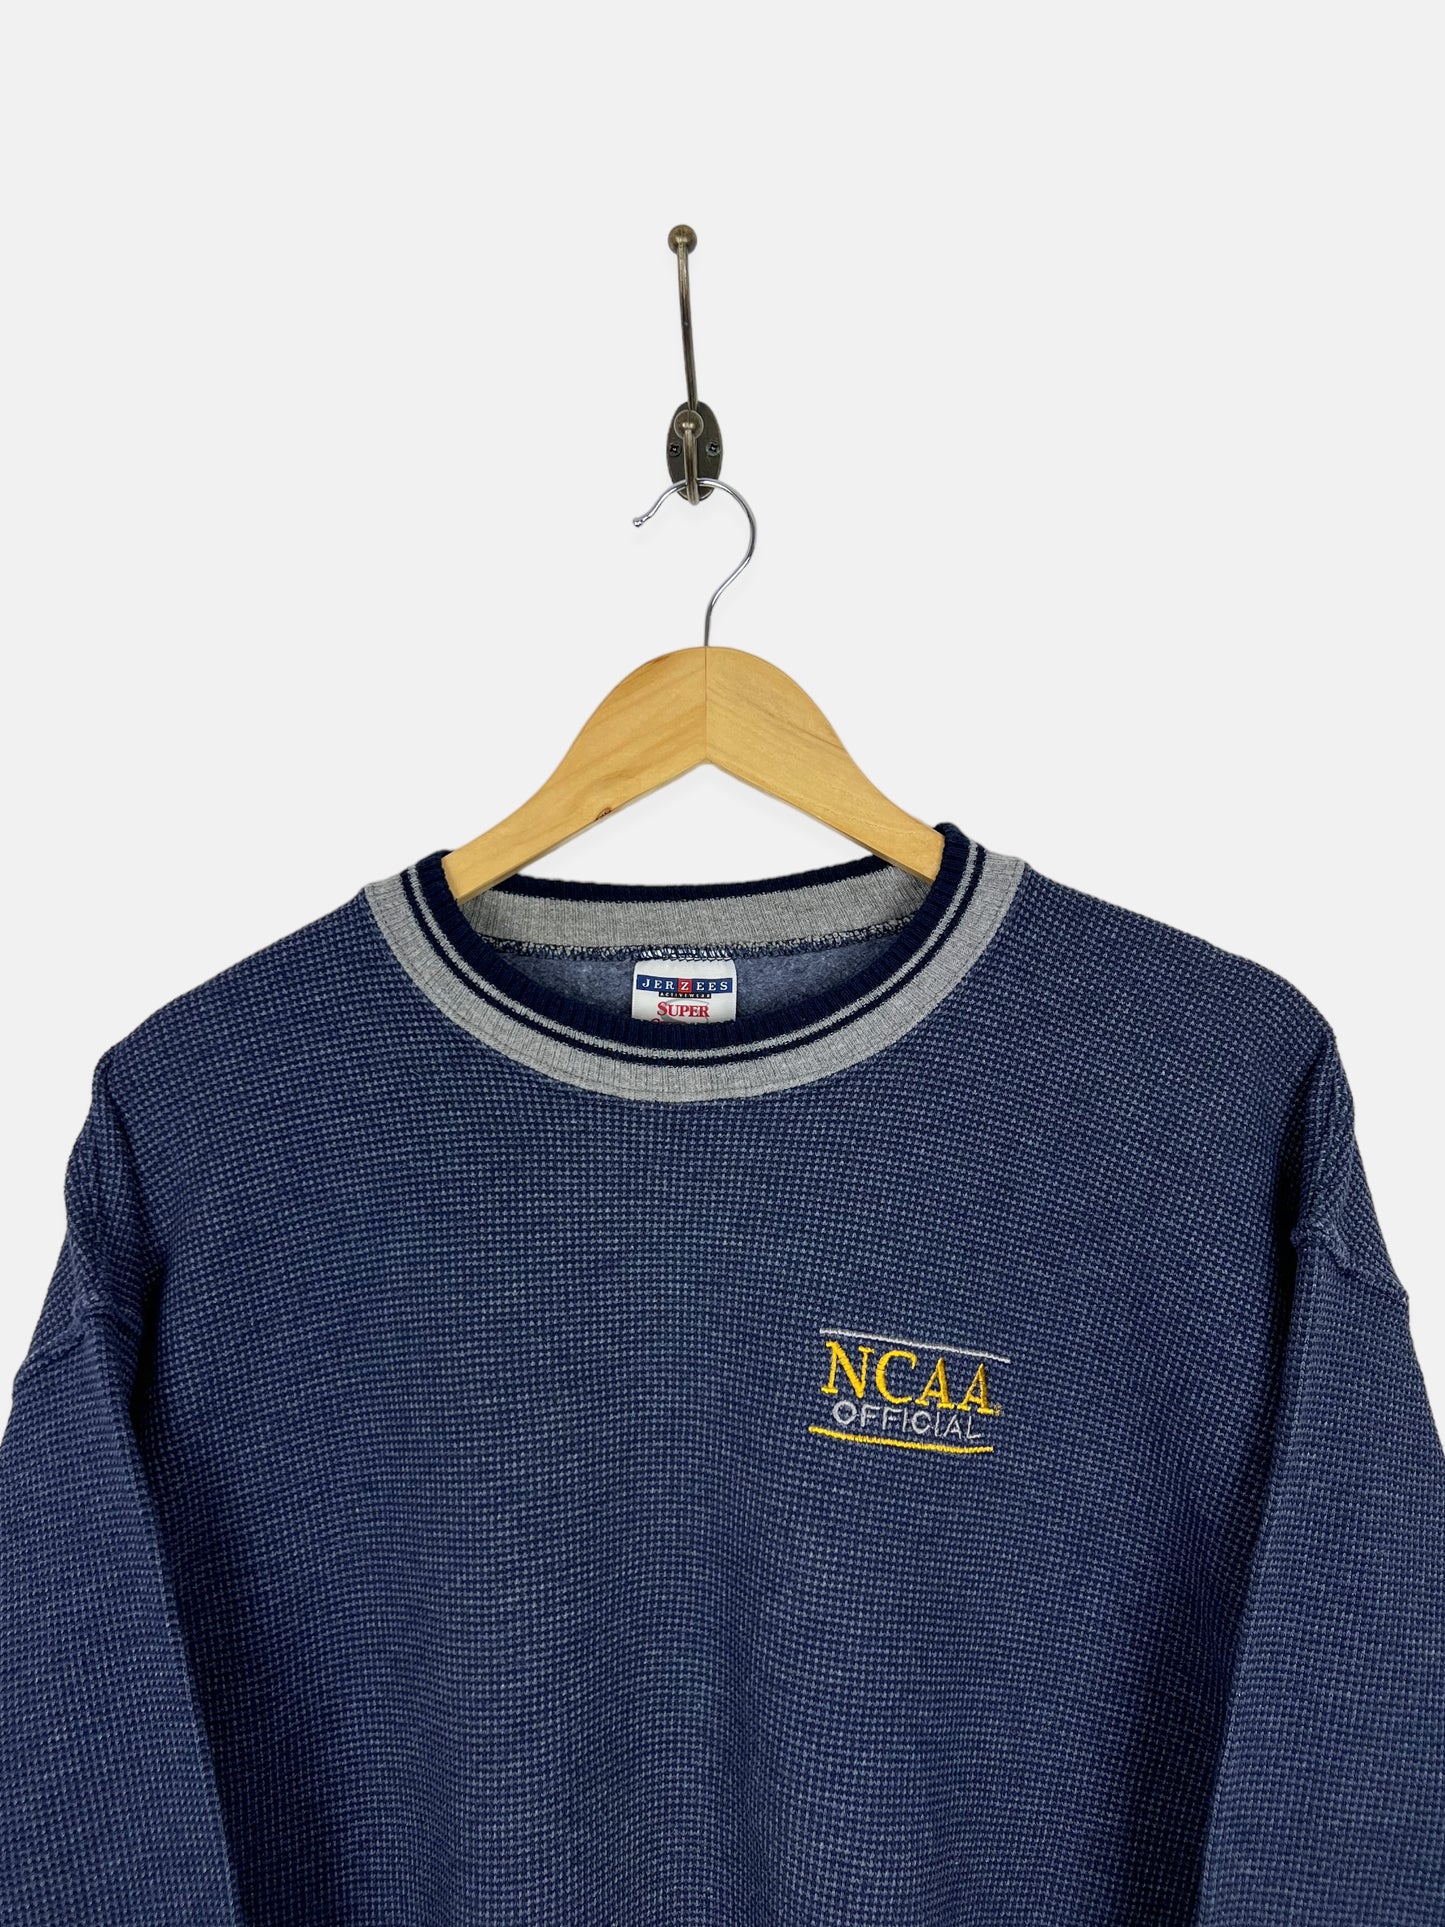 90's NCAA Official Embroidered Vintage Sweatshirt Size M